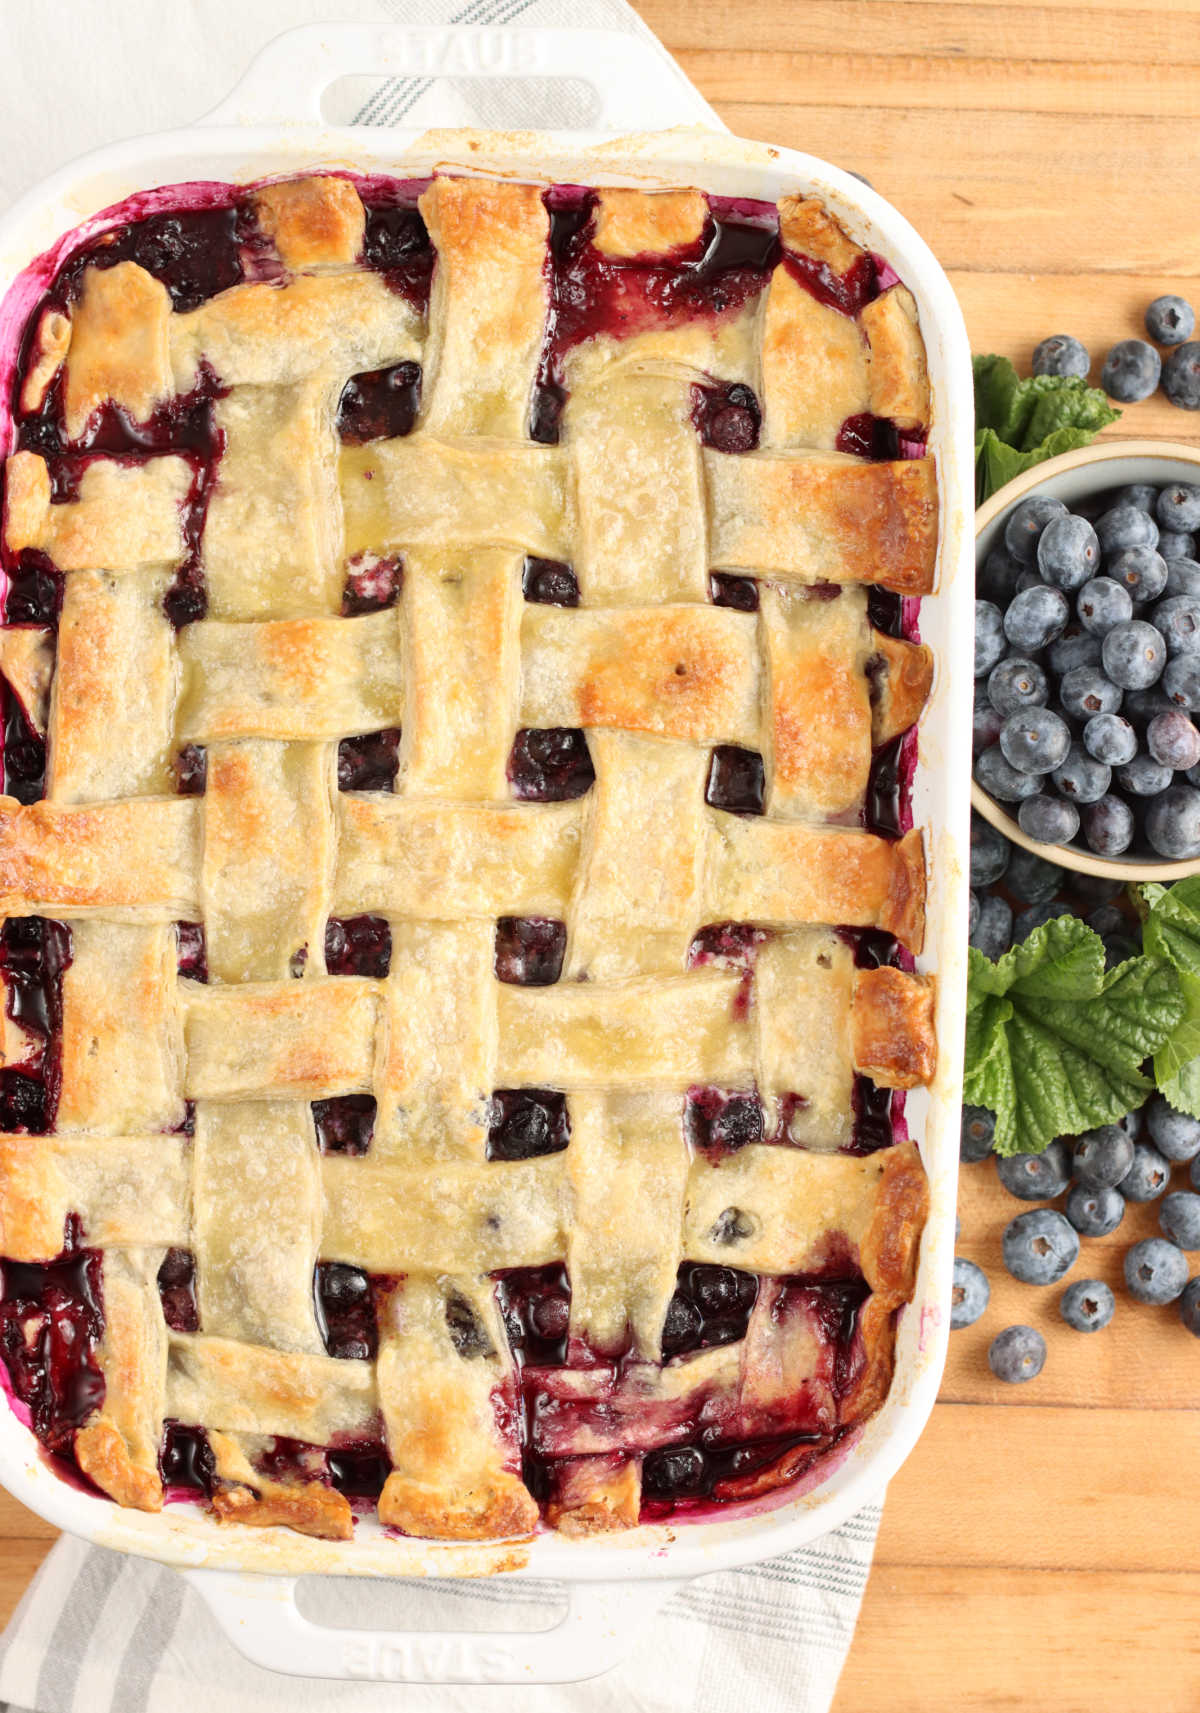 Blueberry cobbler with pie crust weaved in white rectangle baking dish on wooden cutting board, loose blueberries around.